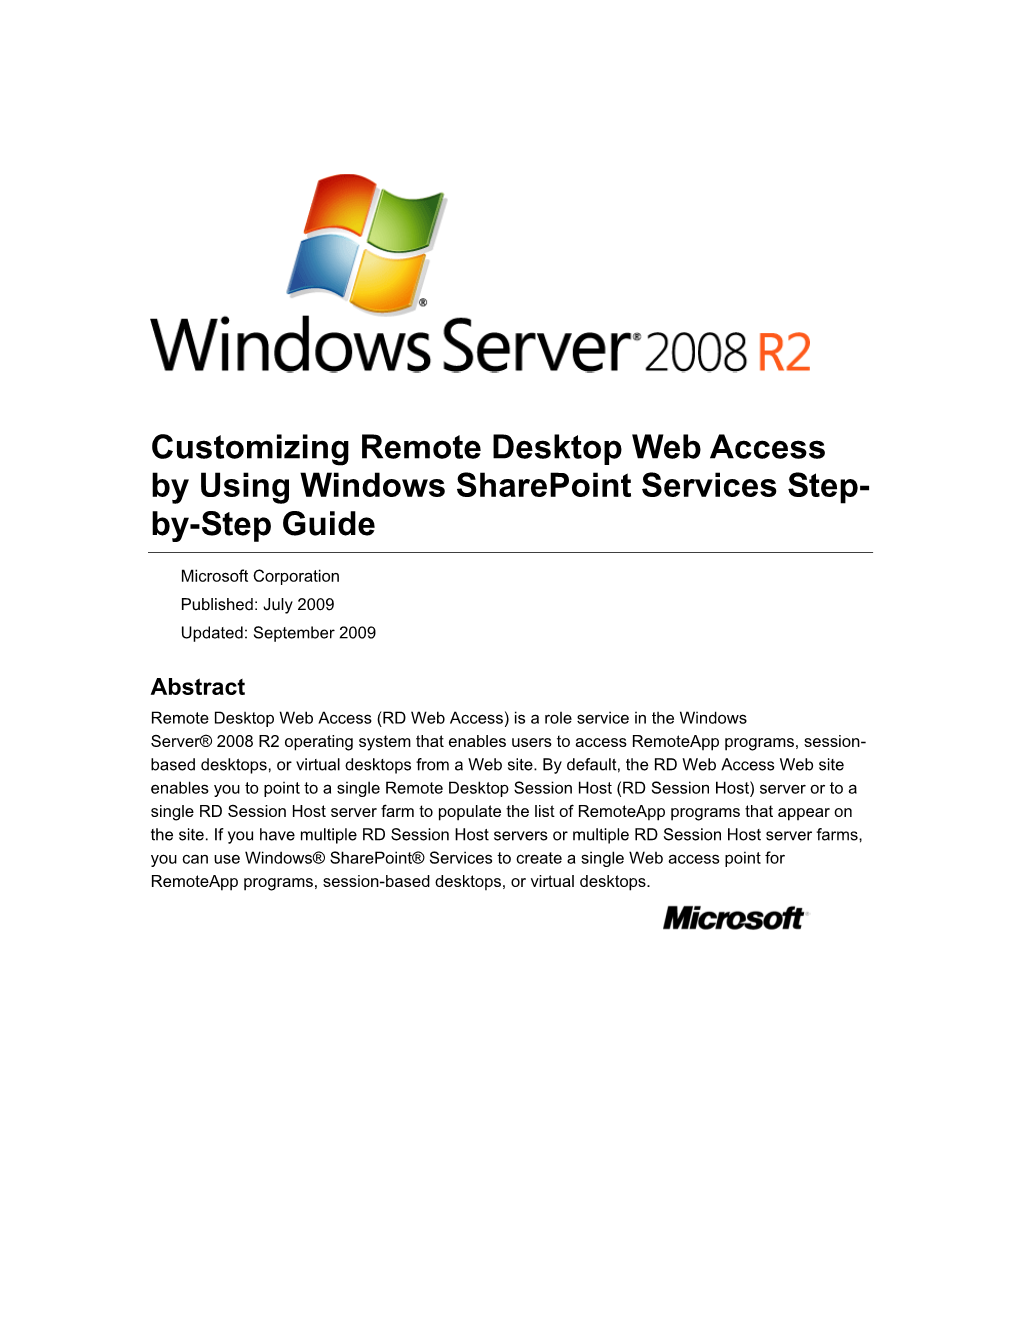 Customizing Remote Desktop Web Access by Using Windows Sharepoint Services Step- By-Step Guide